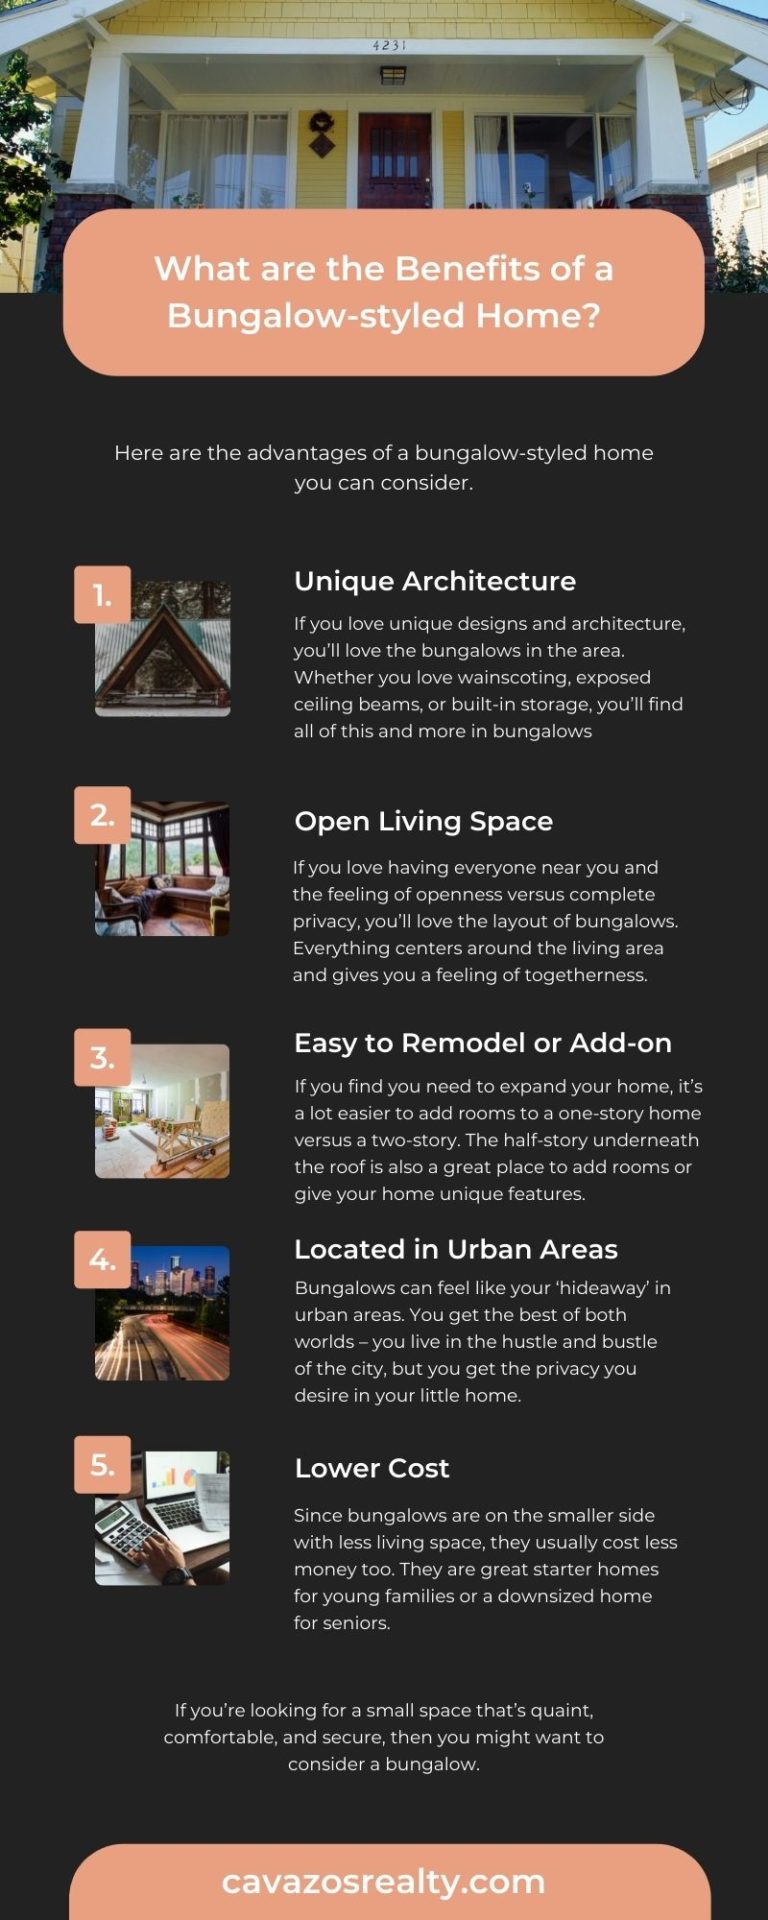 What are the Benefits of a Bungalow-styled Home Infographic